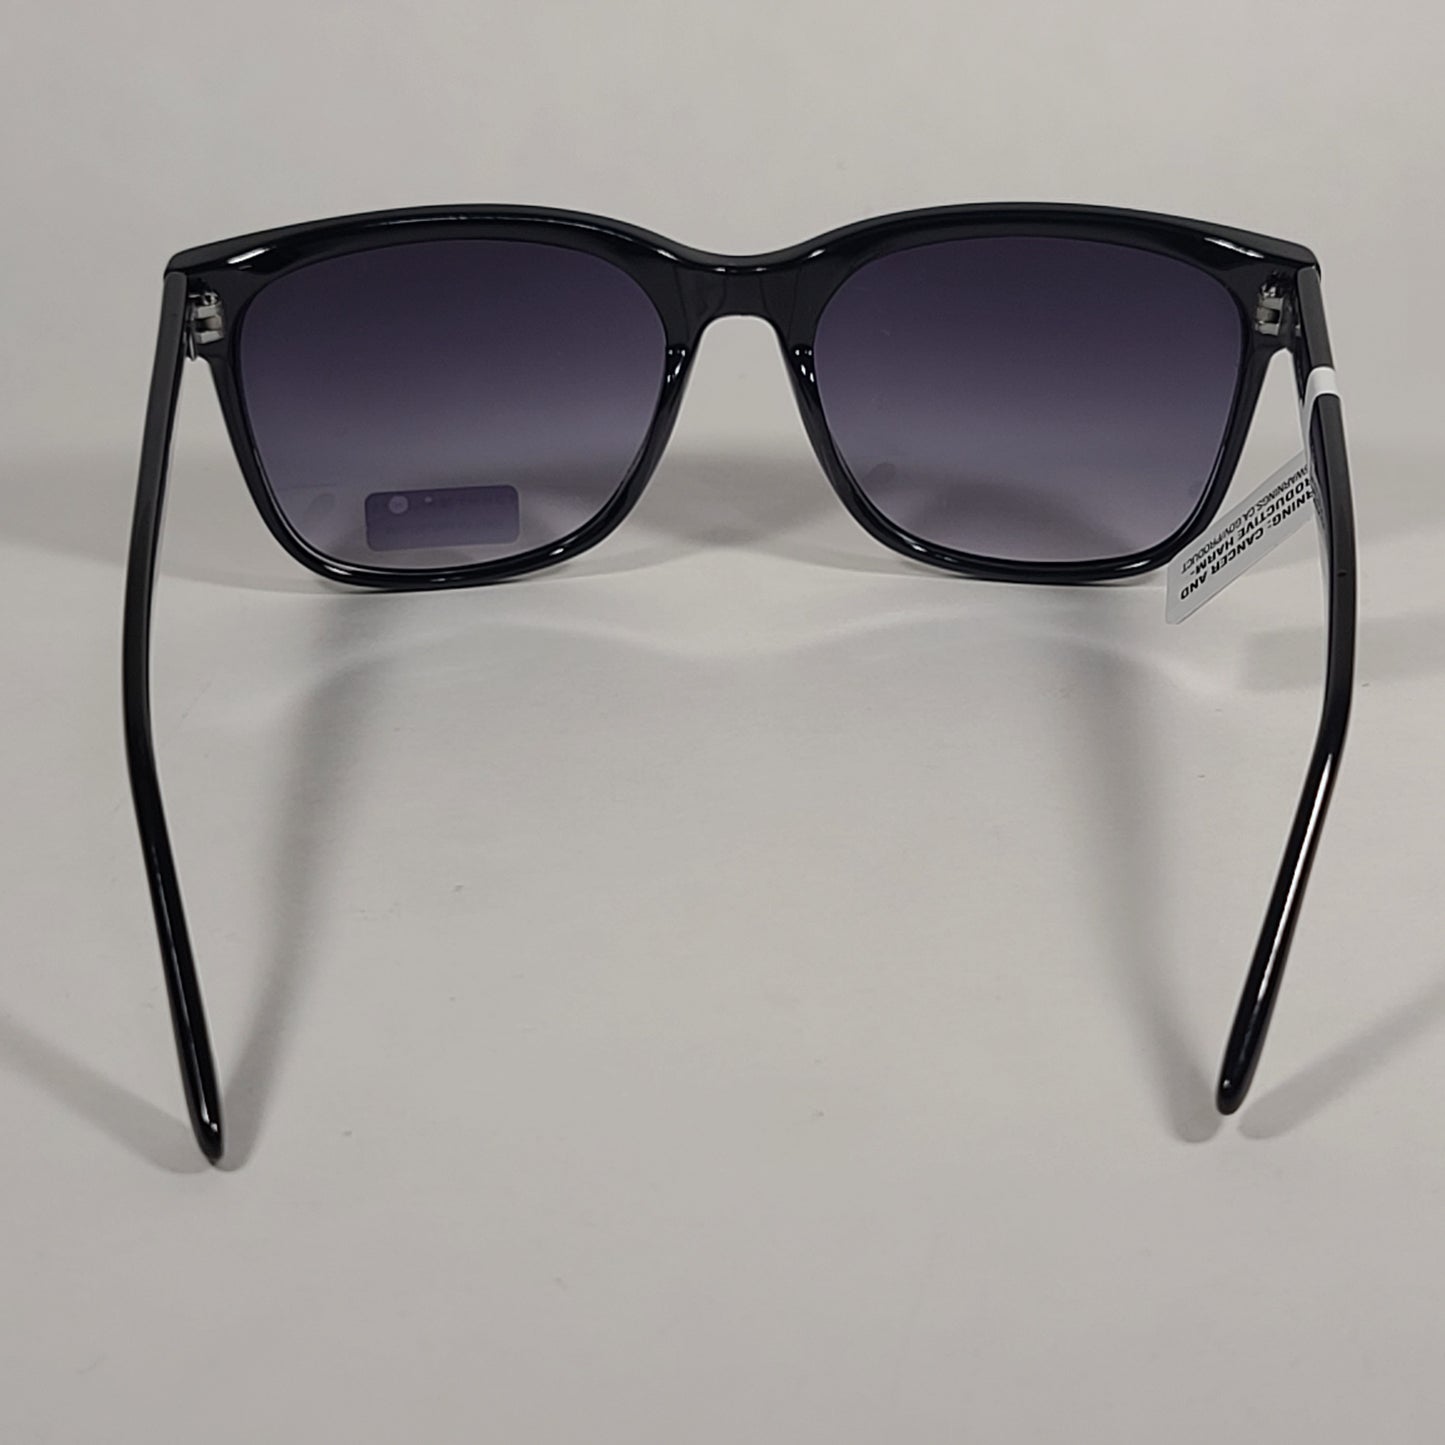 Tommy Hilfiger Lilly Square Sunglasses Shiny Black Frame Smoke Gradient Lens LILLY WP OL481 - Sunglasses